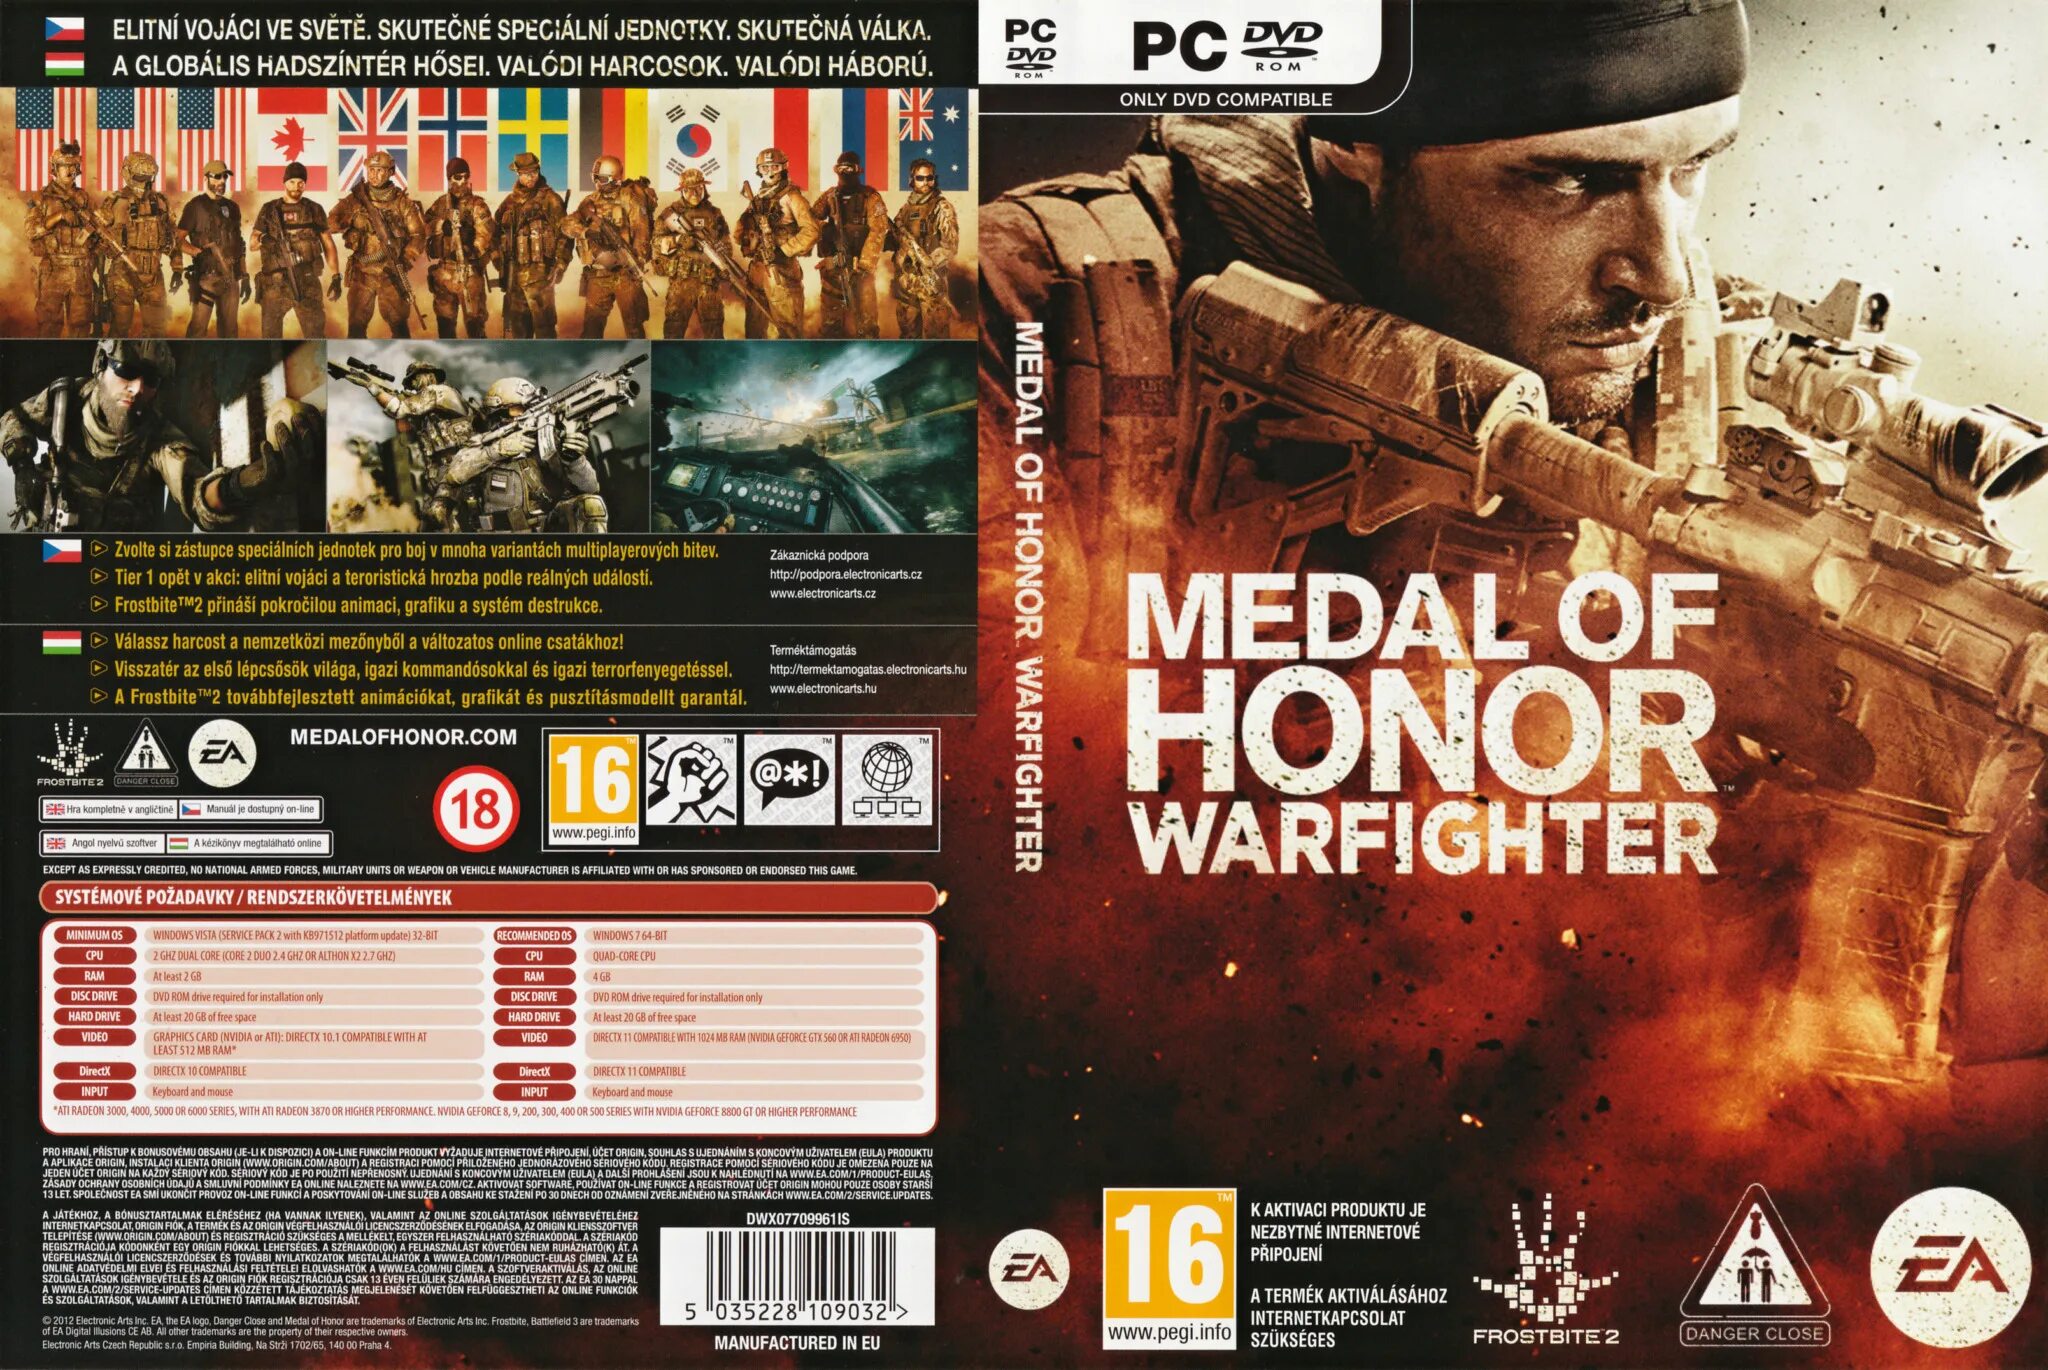 Medal of honor чит. Medal of Honor Warfighter ps3 обложка. Диск медал оф хонор. Medal of Honor: Warfighter (2012). Xbox 360 обложка диска Medal of Honor Warfighter.